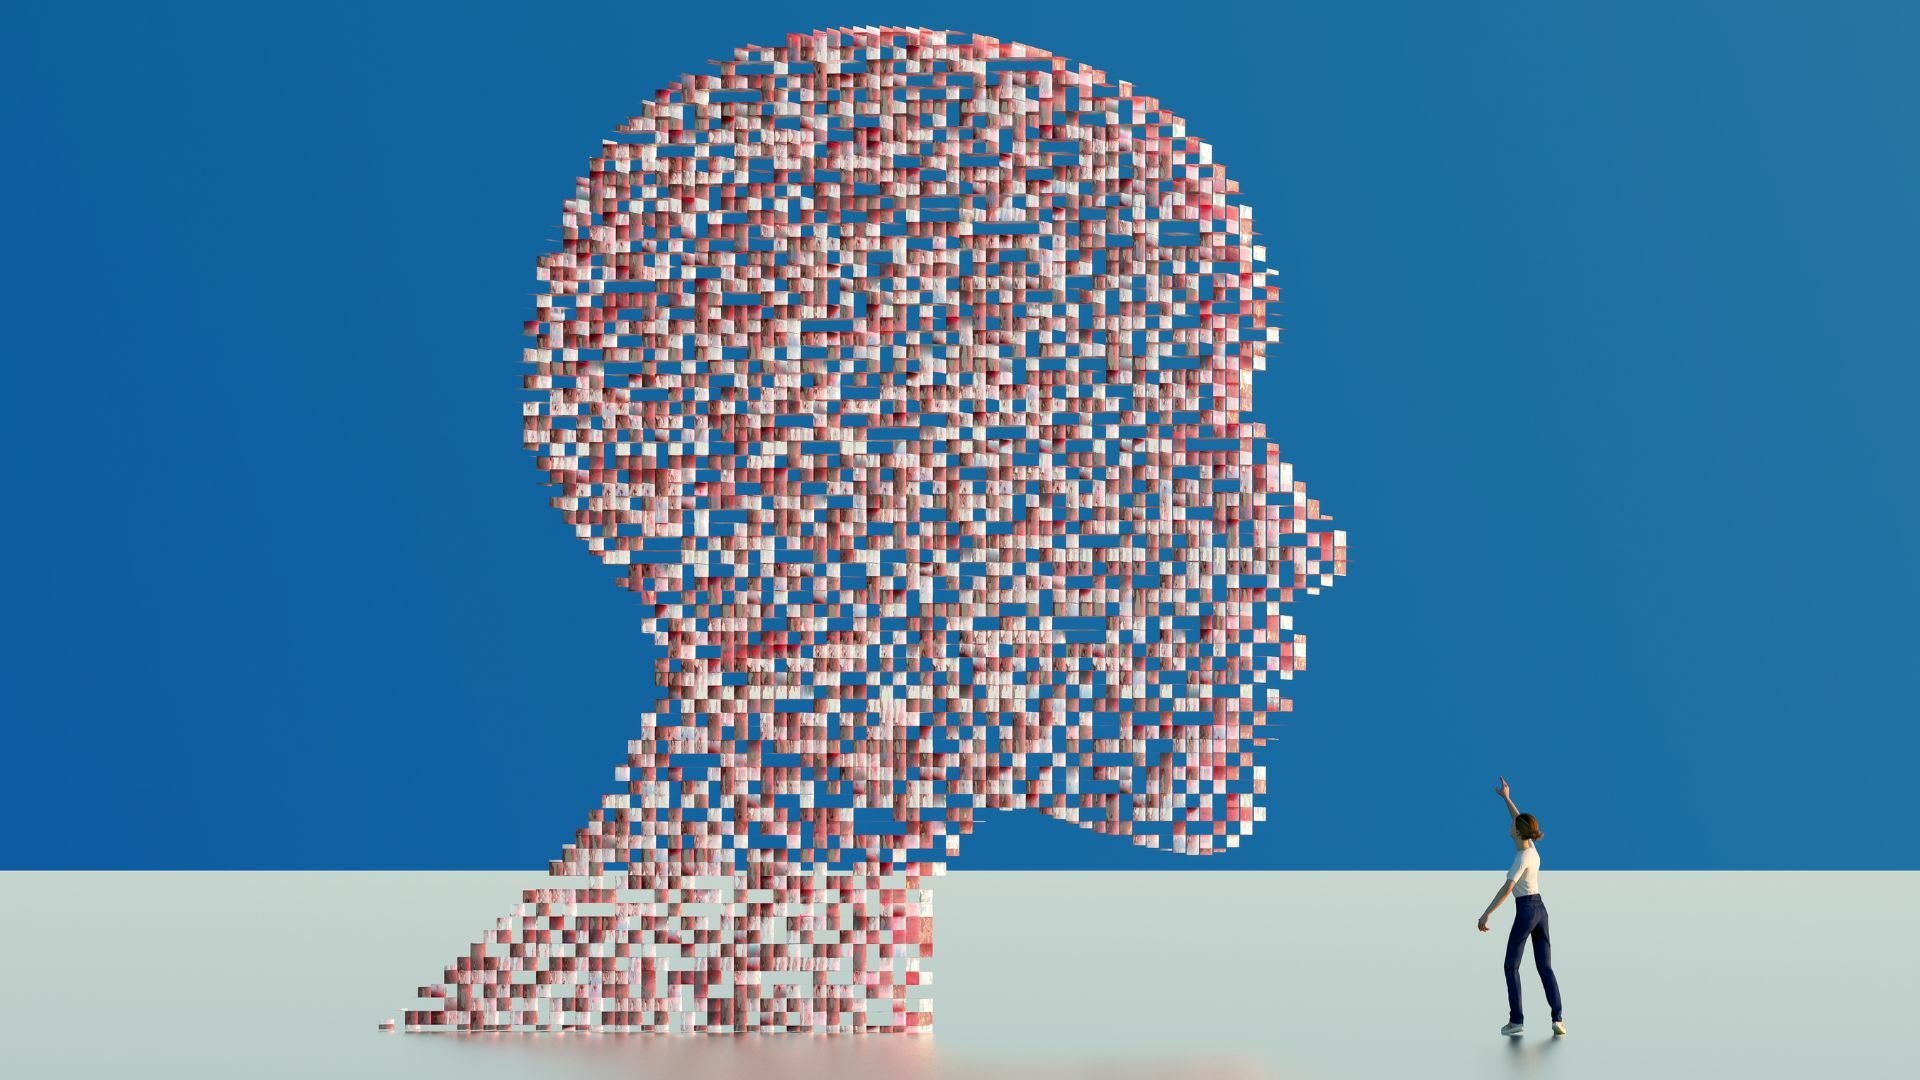 Pixelated human head as artificial intelligence, with a small human reaching towards it.